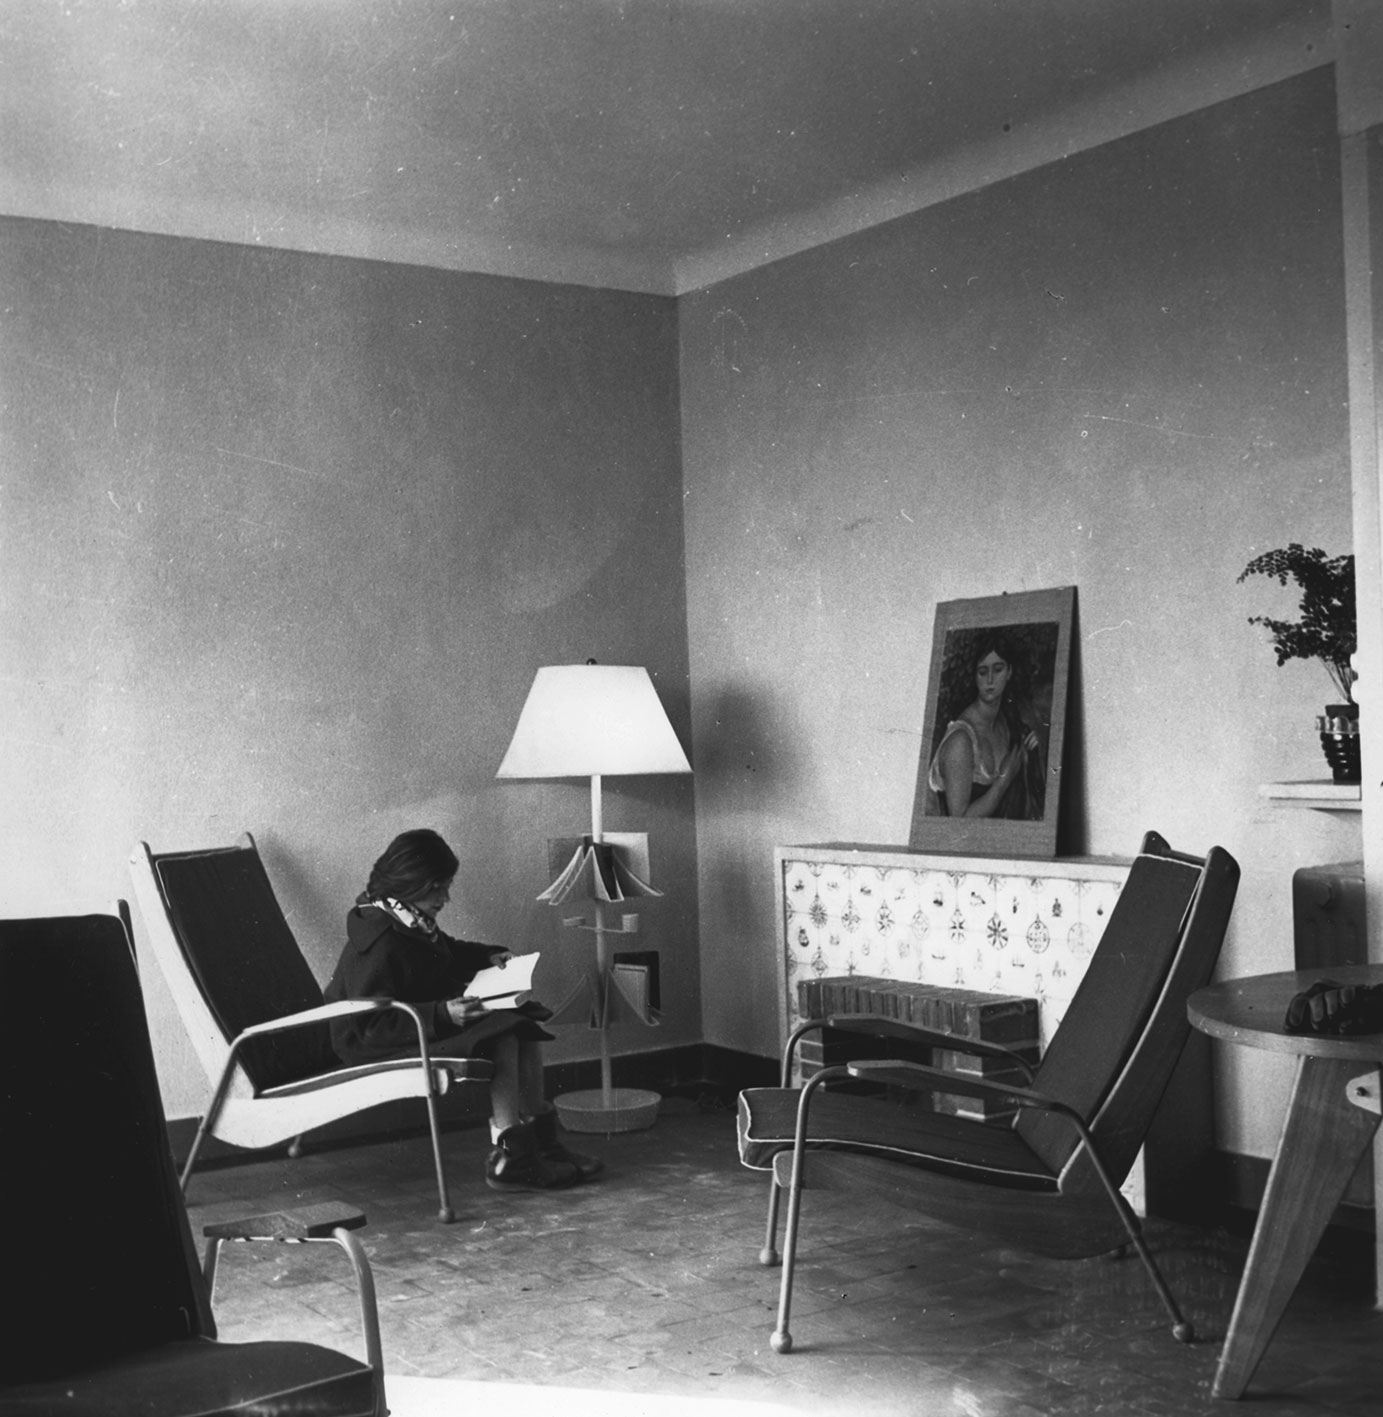 Model apartment presented by the Ministère de la Reconstruction, furnished with Visiteur FV 13 armchairs, ca. 1950.